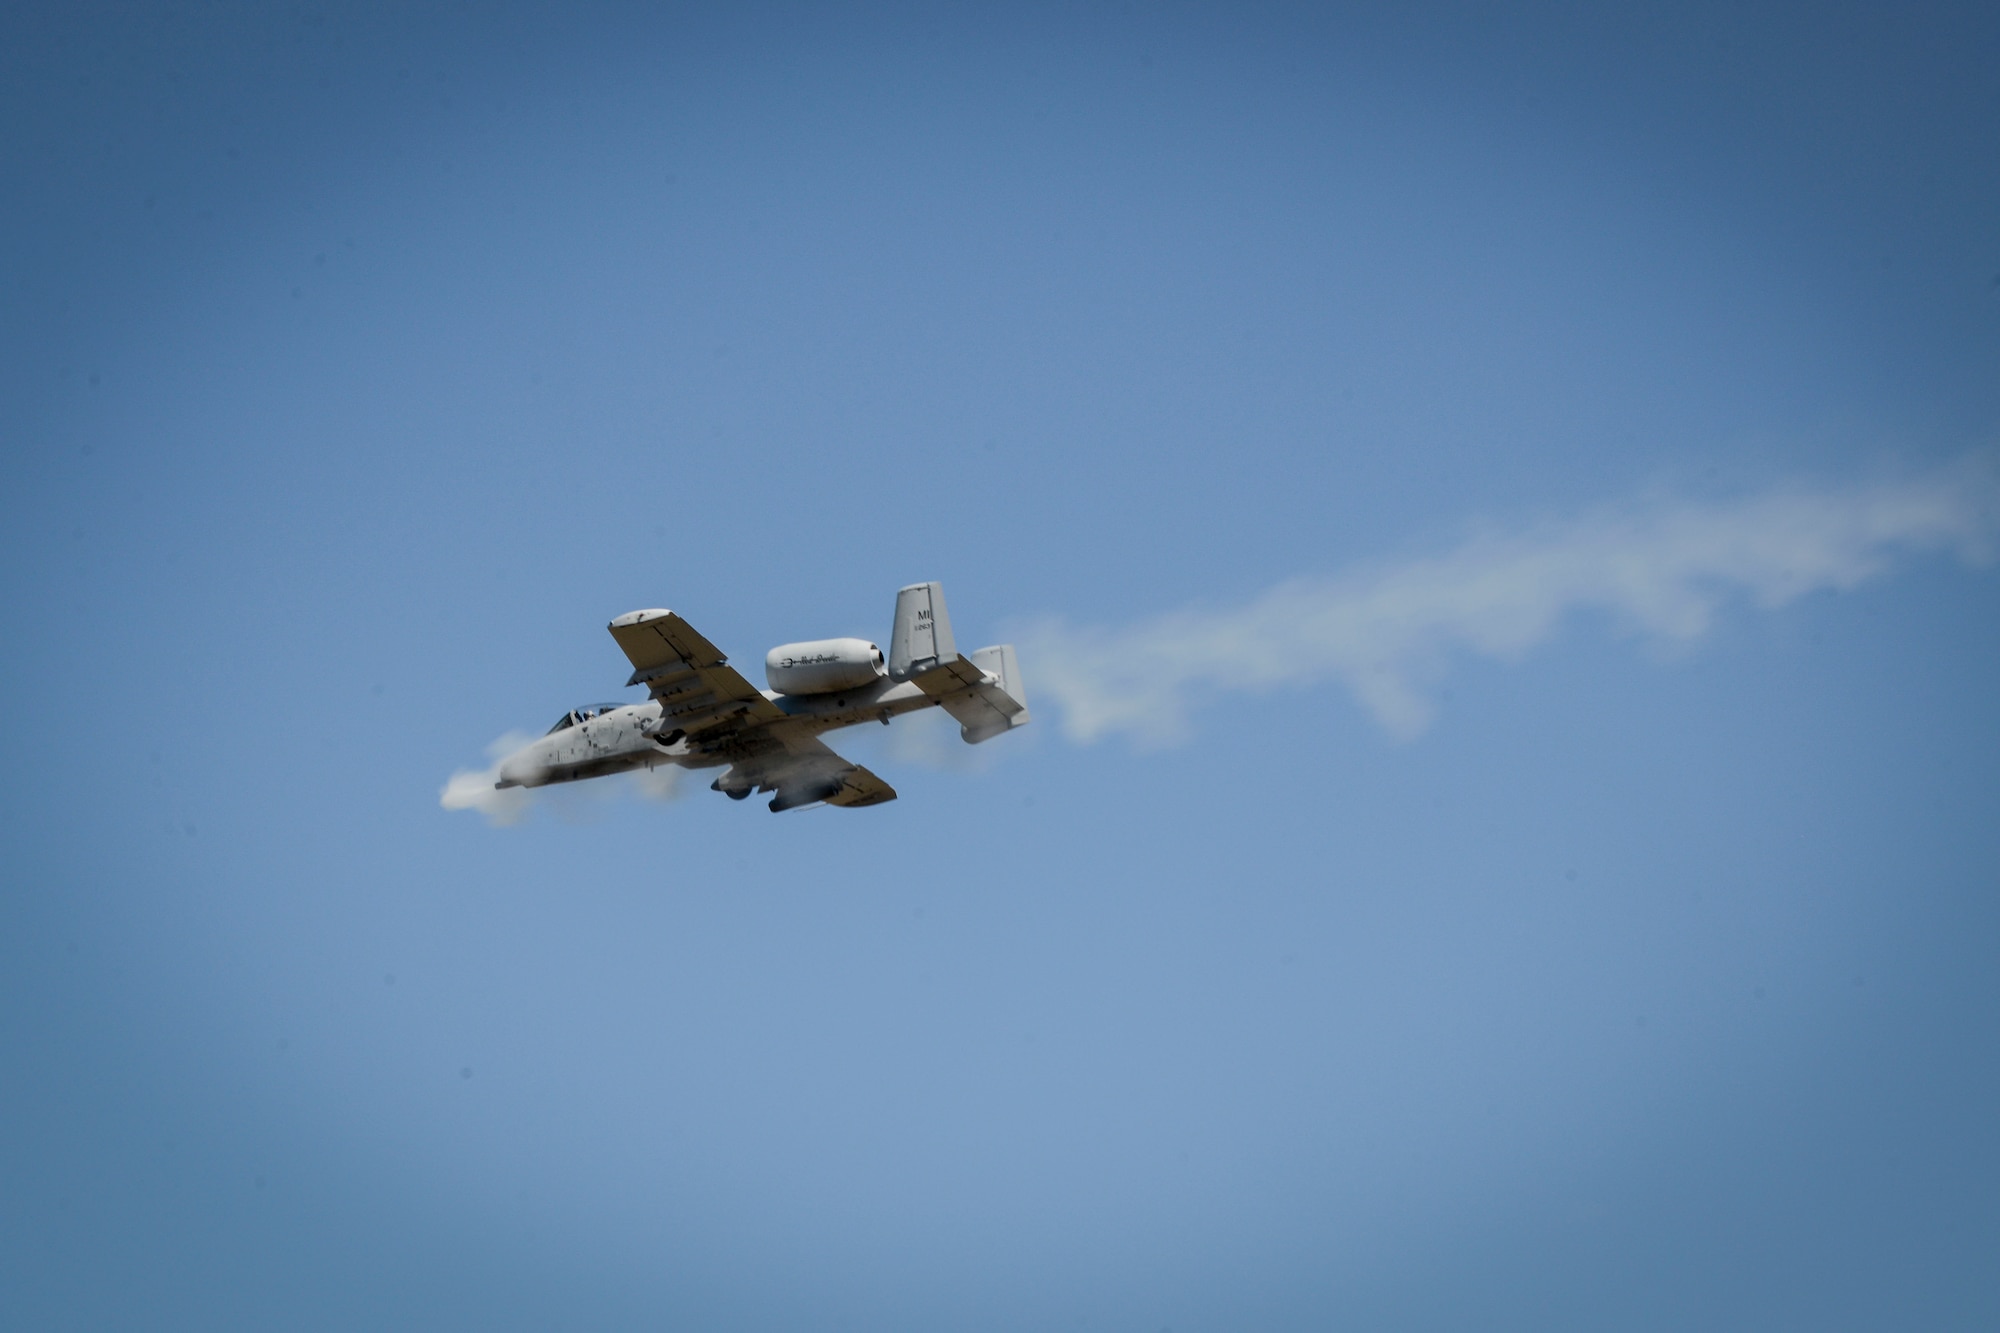 An A-10C Thunderbolt II from the 107 th Fighter Squadron, flies over Adazi Military Training Base, Latvia, June 13, 2016.  U.S. forces and NATO partners are in Europe participating in Saber Strike 16; a long-standing, U.S. Joint Chiefs of Staff-directed, U.S. Army Europe-led cooperative-training exercise, which has been conducted annually since 2010.  The U.S. presence in Europe and the relationships built over the past 70 years provide the U.S. strategic access critical to meet our NATO commitment to respond to threats against our allies and partners. (U.S. Air Force photo/Senior Airman Nicole Keim)